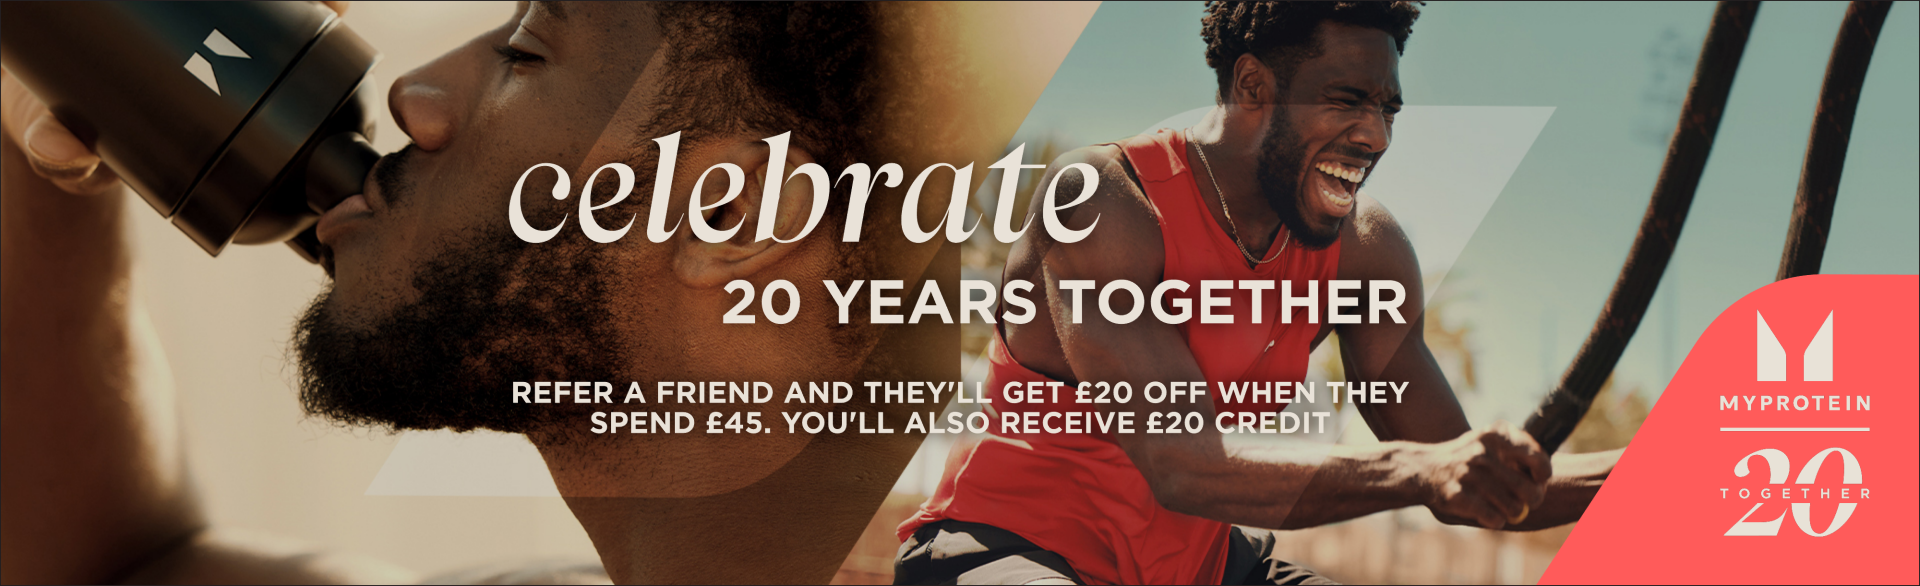 Celebrate 20 Years together. They get £20 off & free UK delivery on their first £45 order. Plus you'll get £20 credit too.